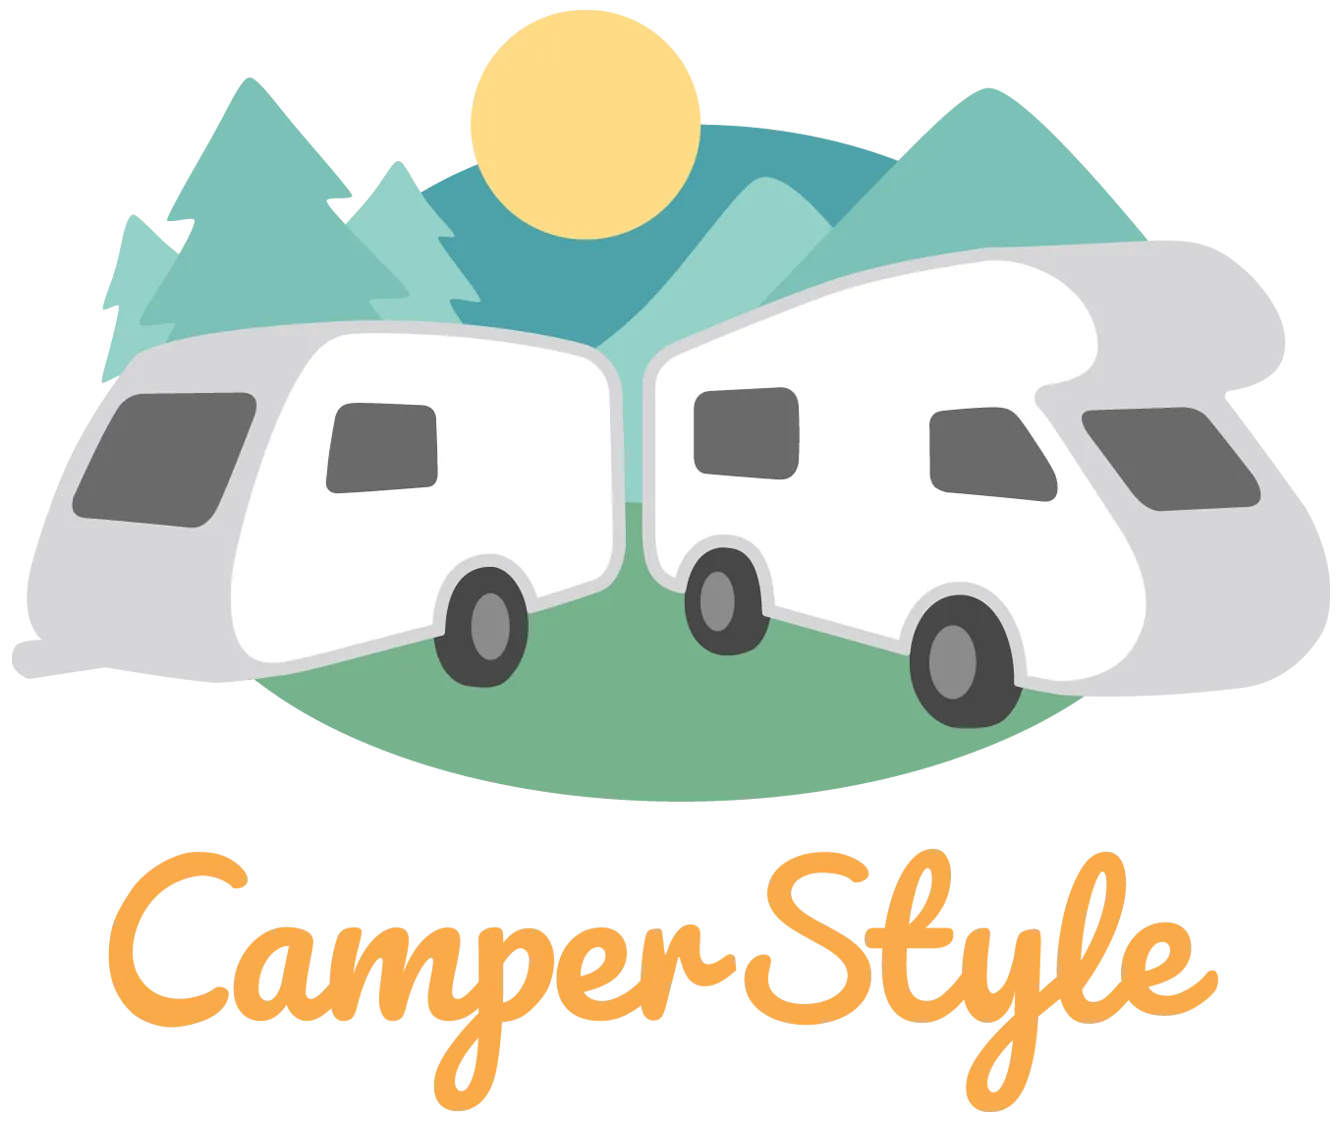 The CamperStyle logo